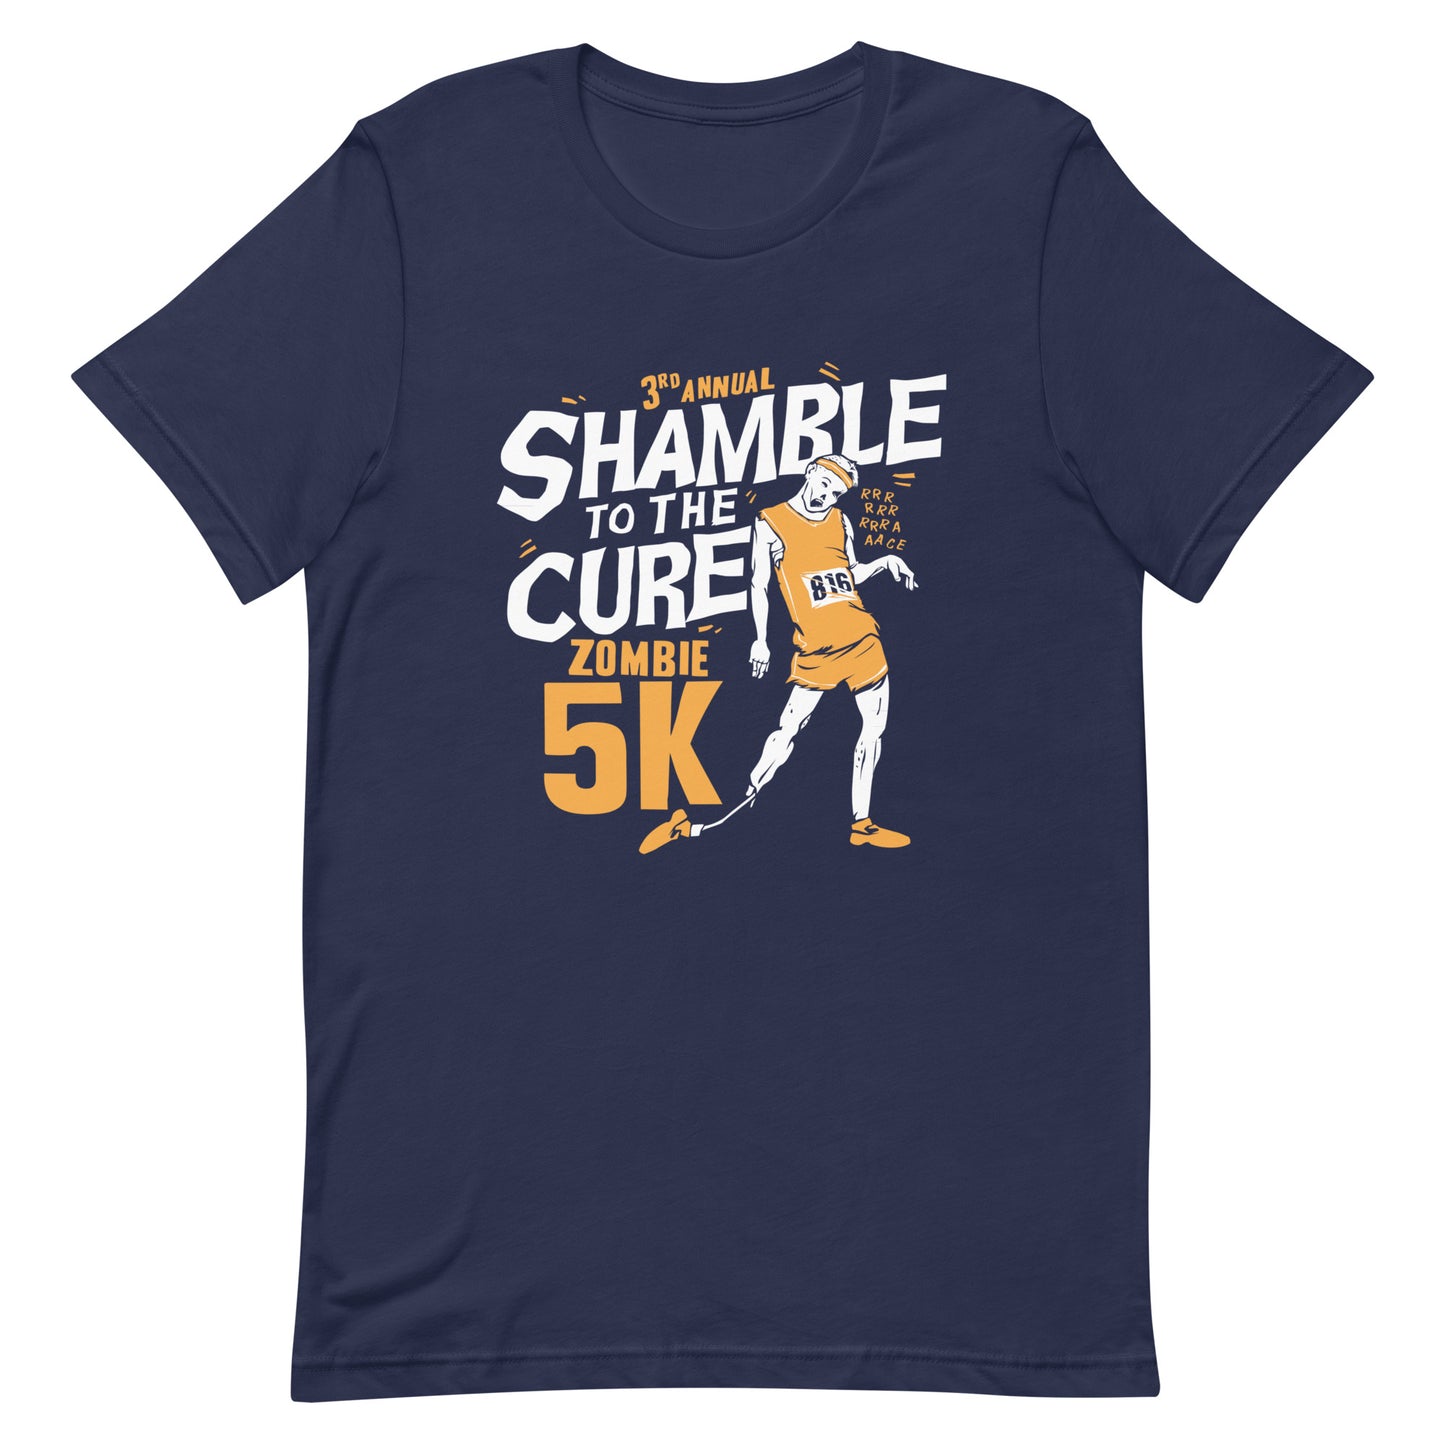 Shamble To The Cure Zombie 5K Men's Signature Tee